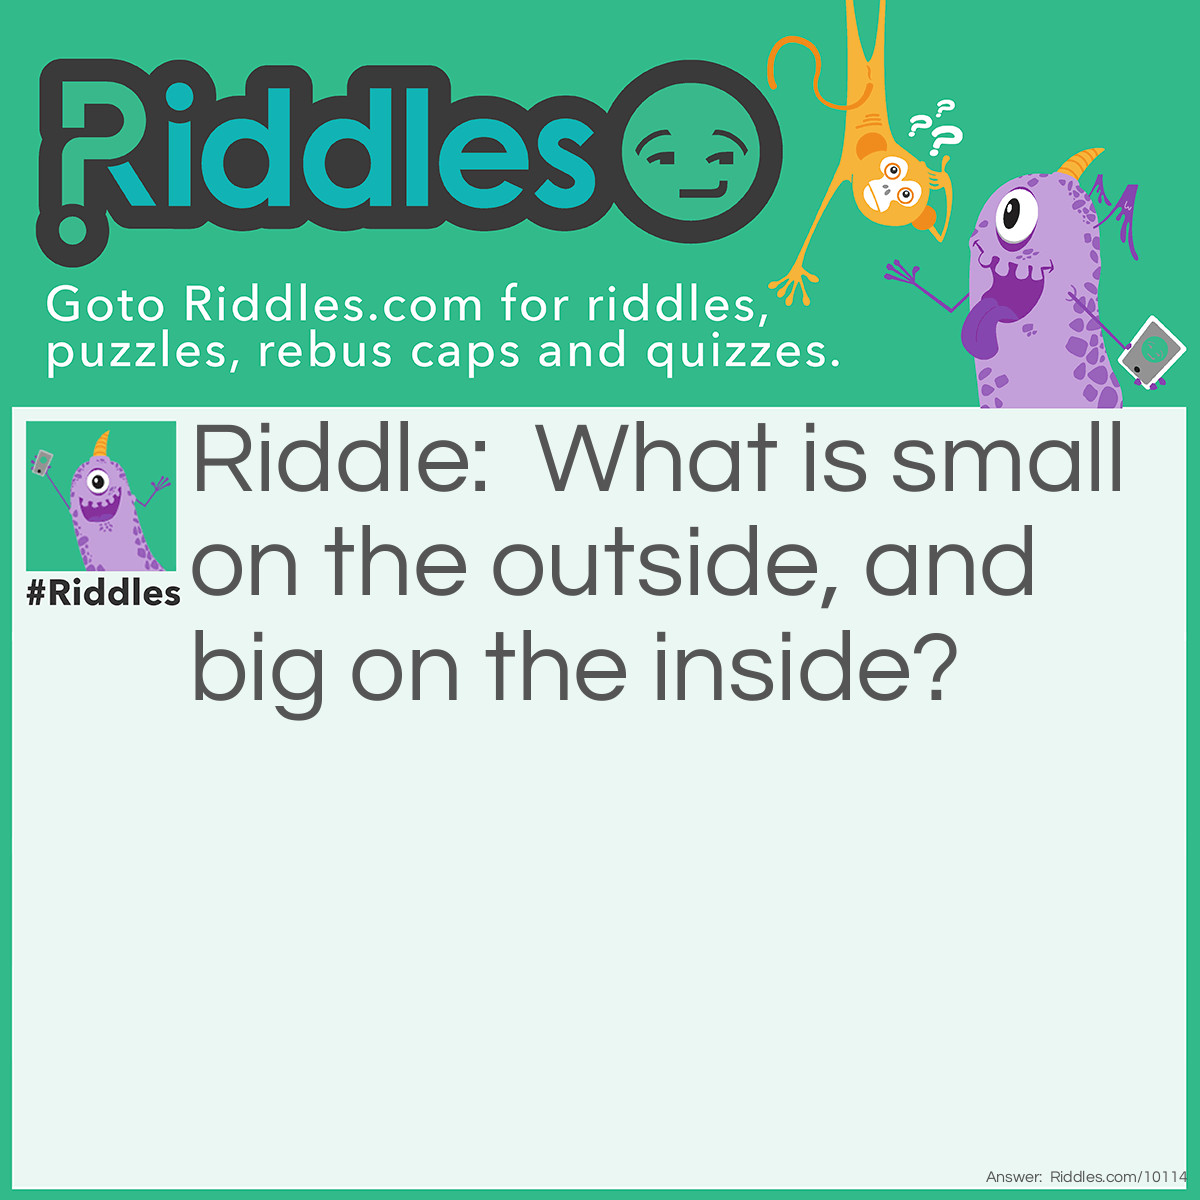 Riddle: What is small on the outside, and big on the inside? Answer: The Tardis.